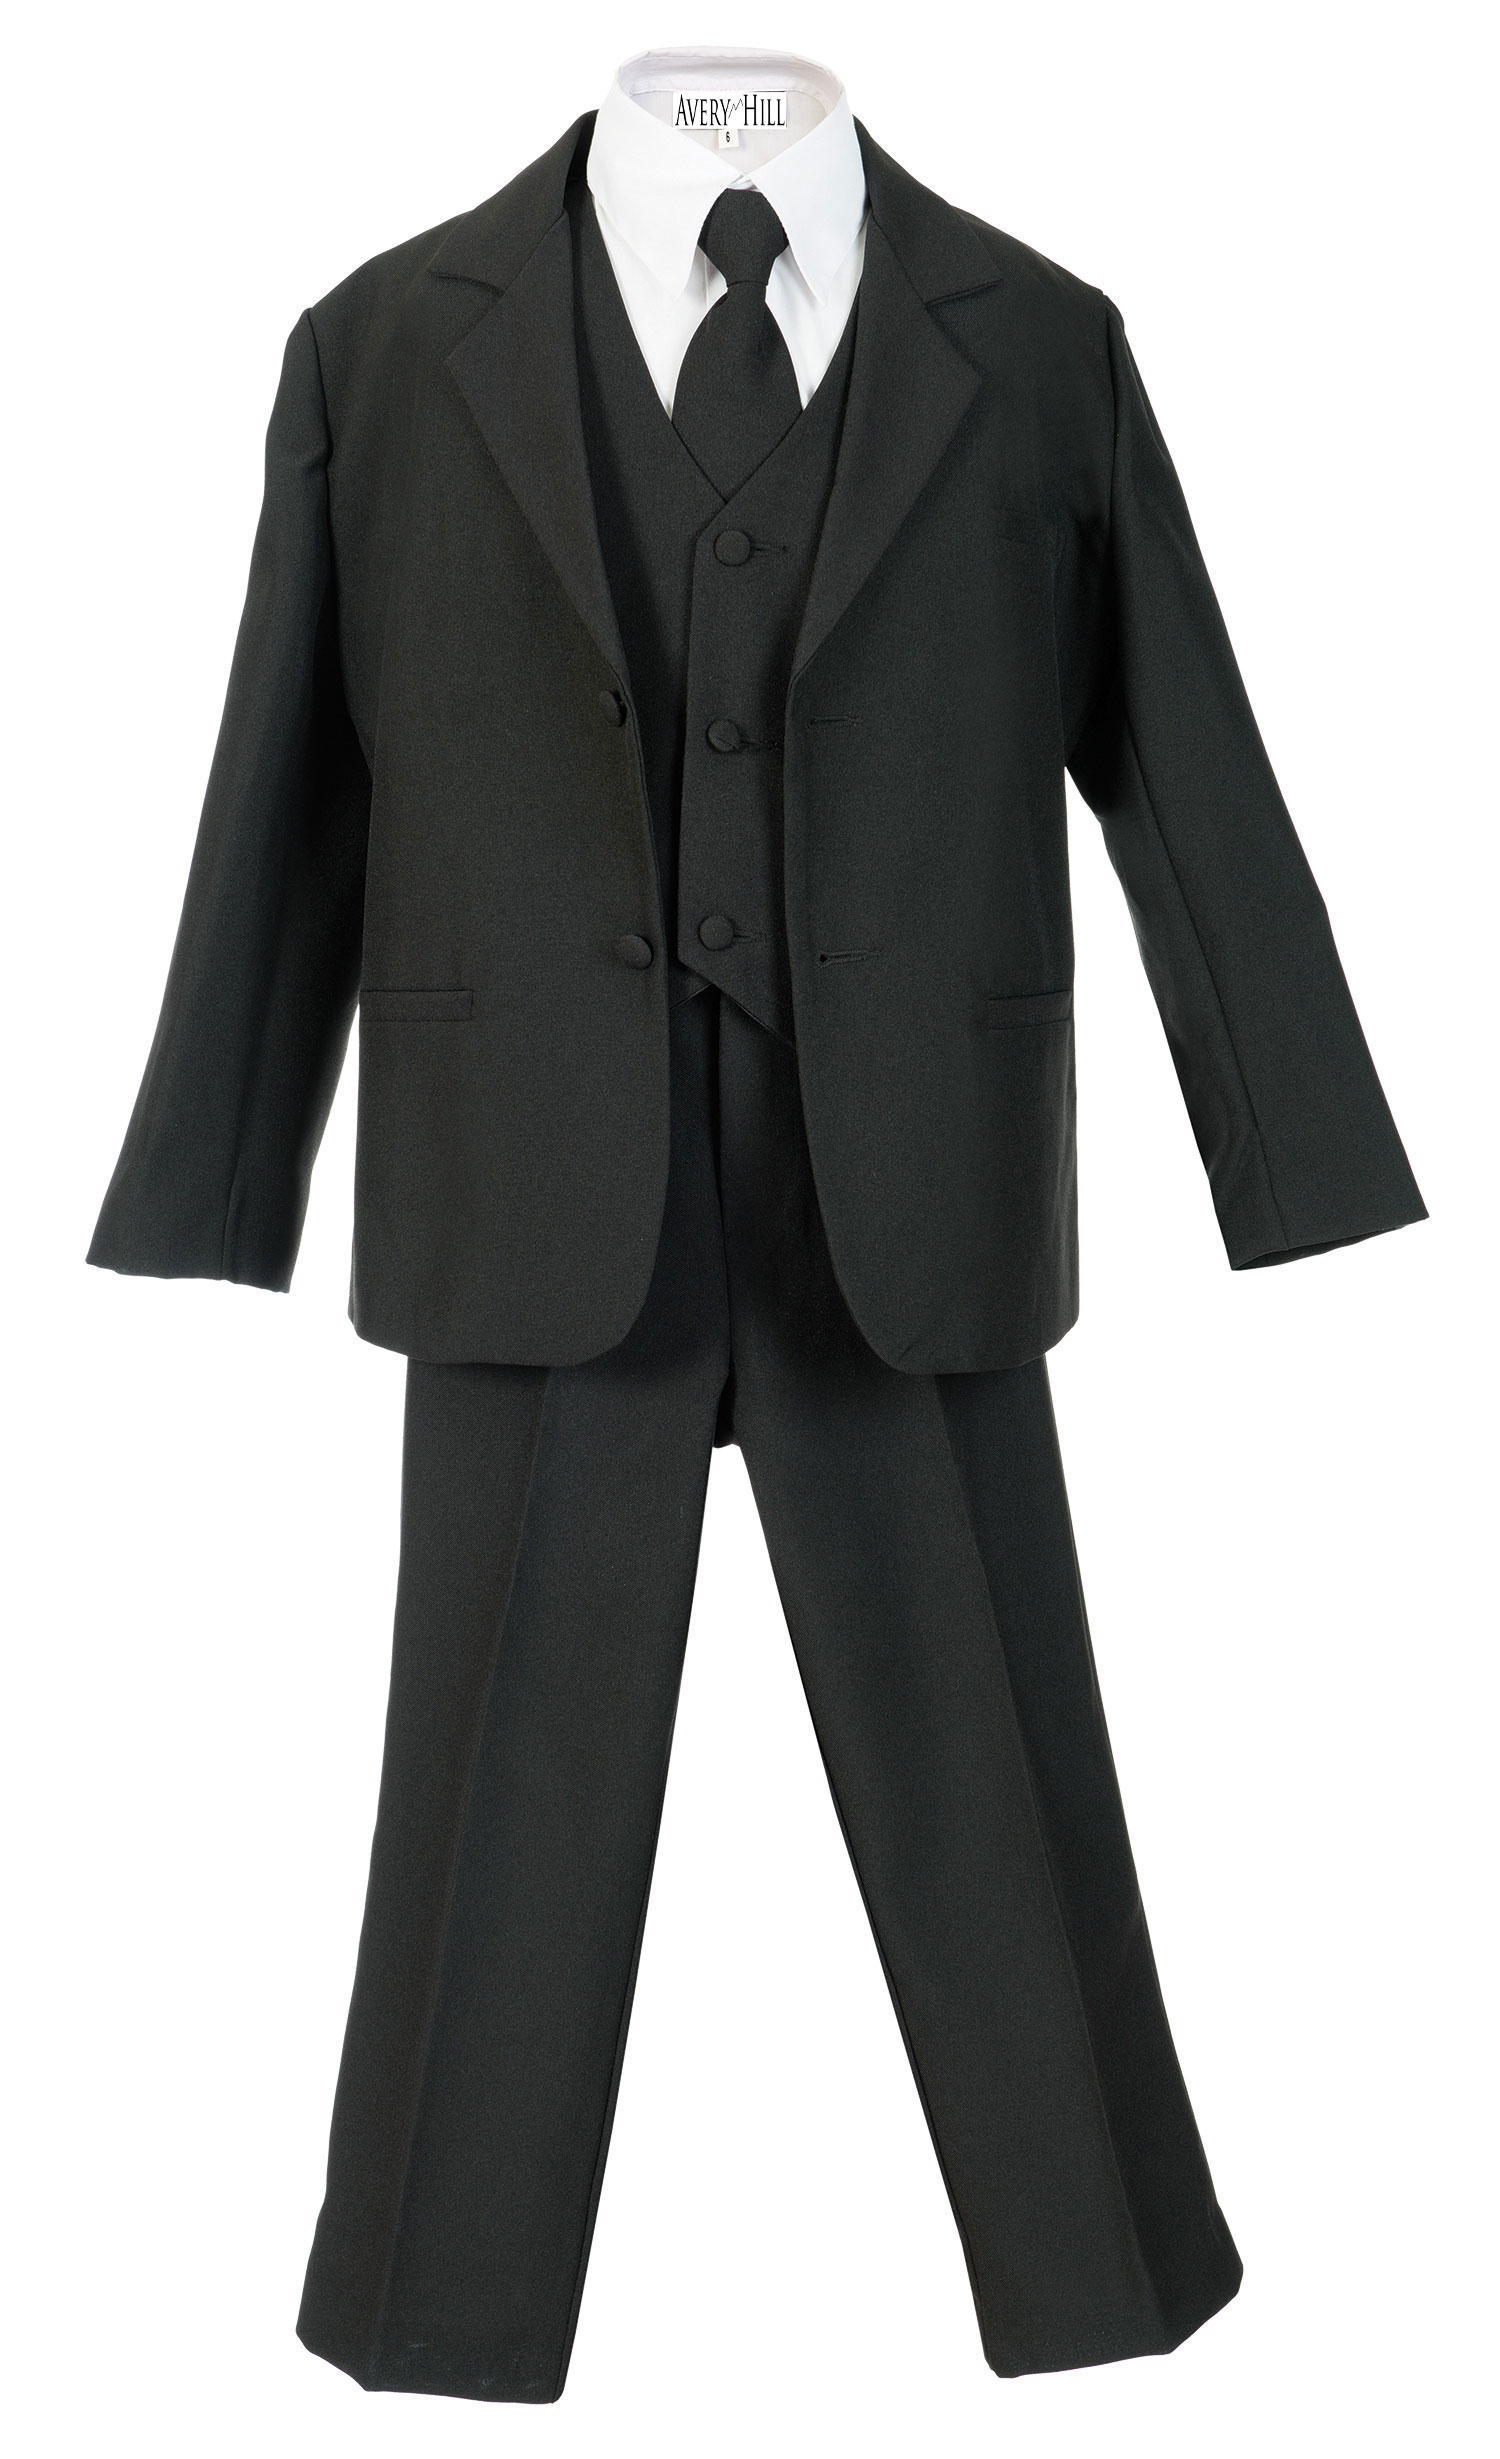 Avery Hill Boys Formal 5 Piece Suit with Shirt and Vest Black - 18